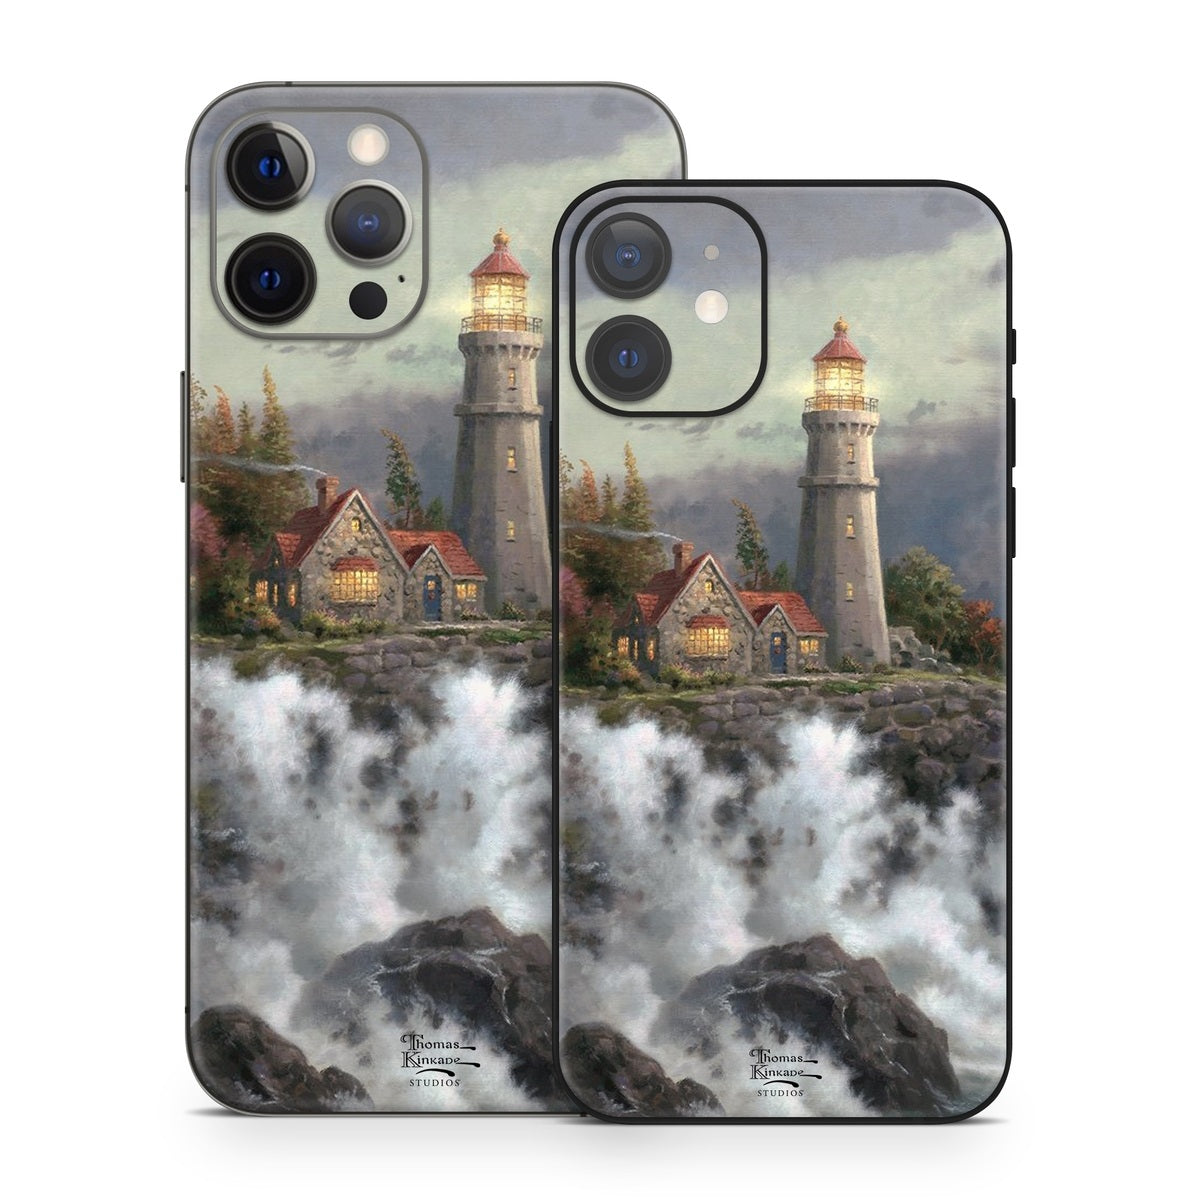 Conquering the Storms - Apple iPhone 12 Skin